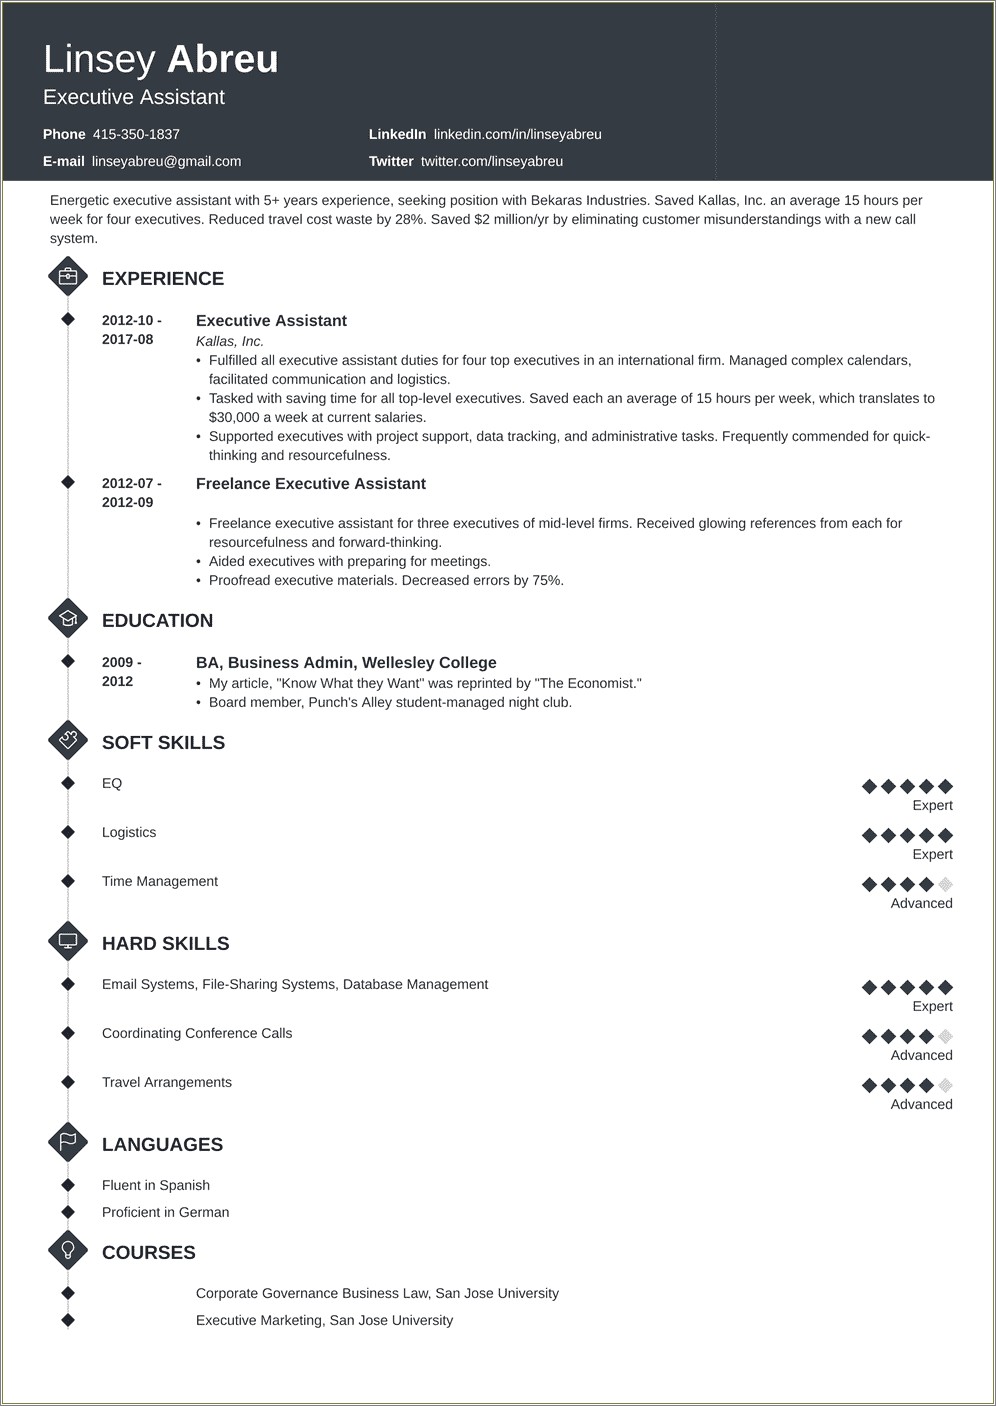 List Of Skills For Executive Assistant Resume